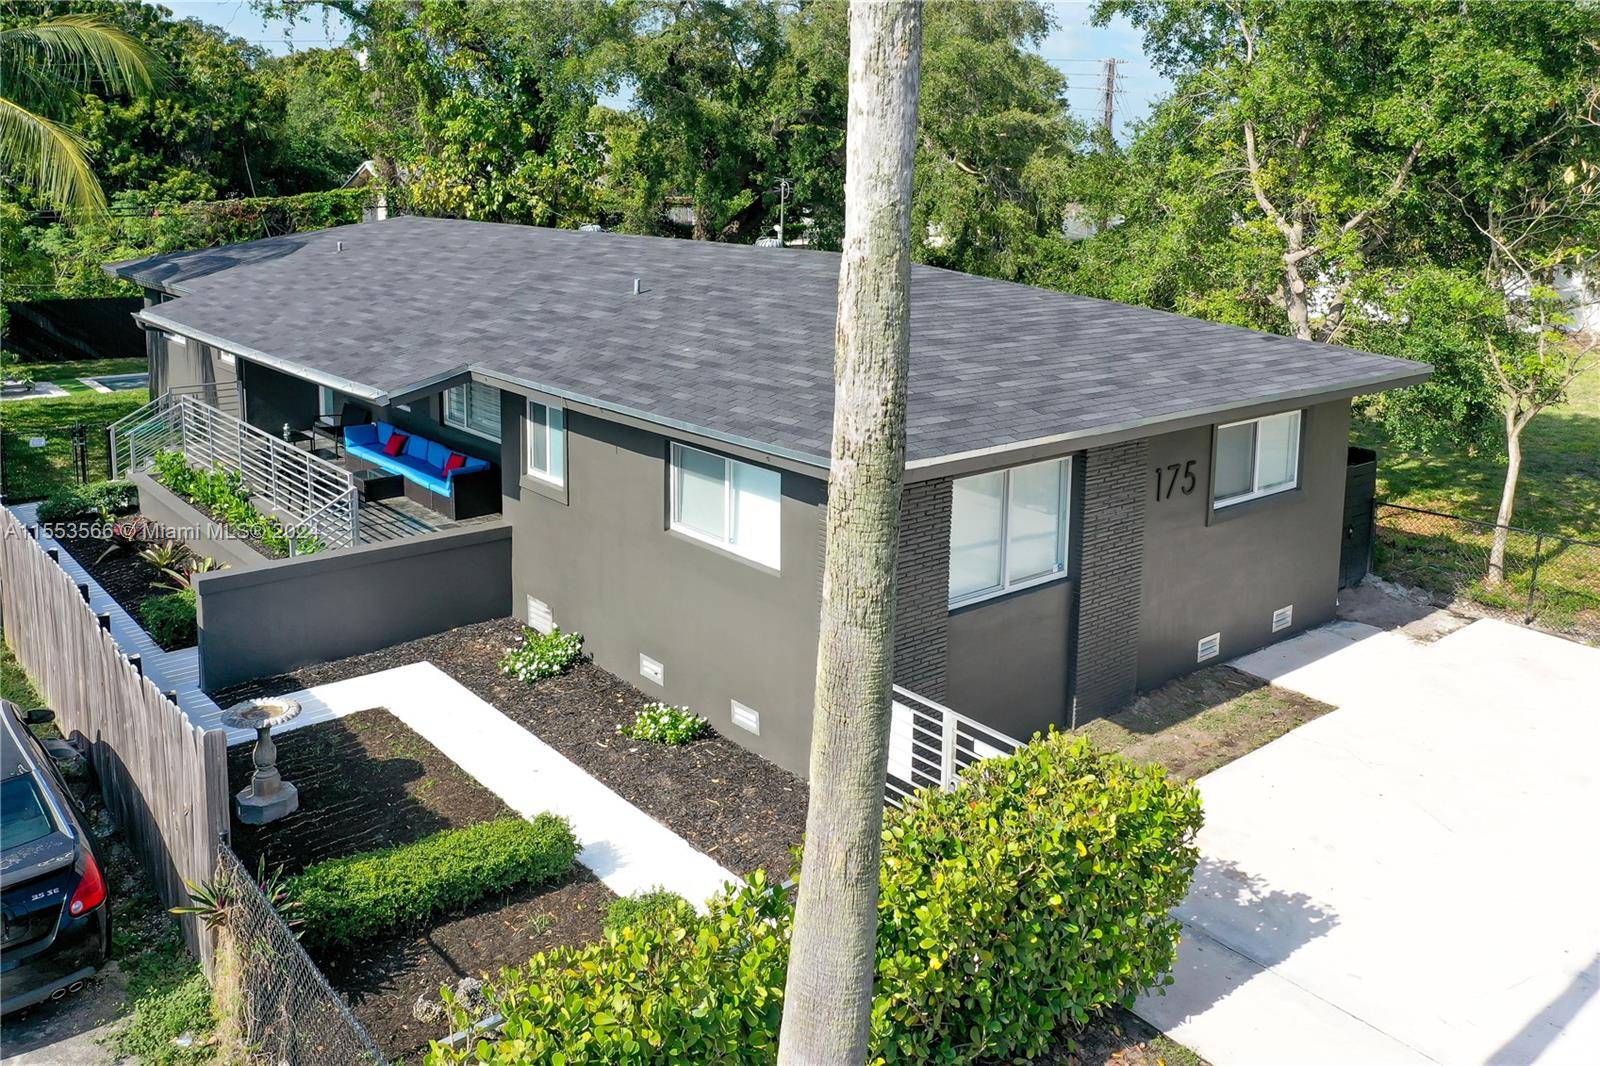 This fully remodeled 4 bedroom, 4 bathroom haven offers 2, 078 sq.